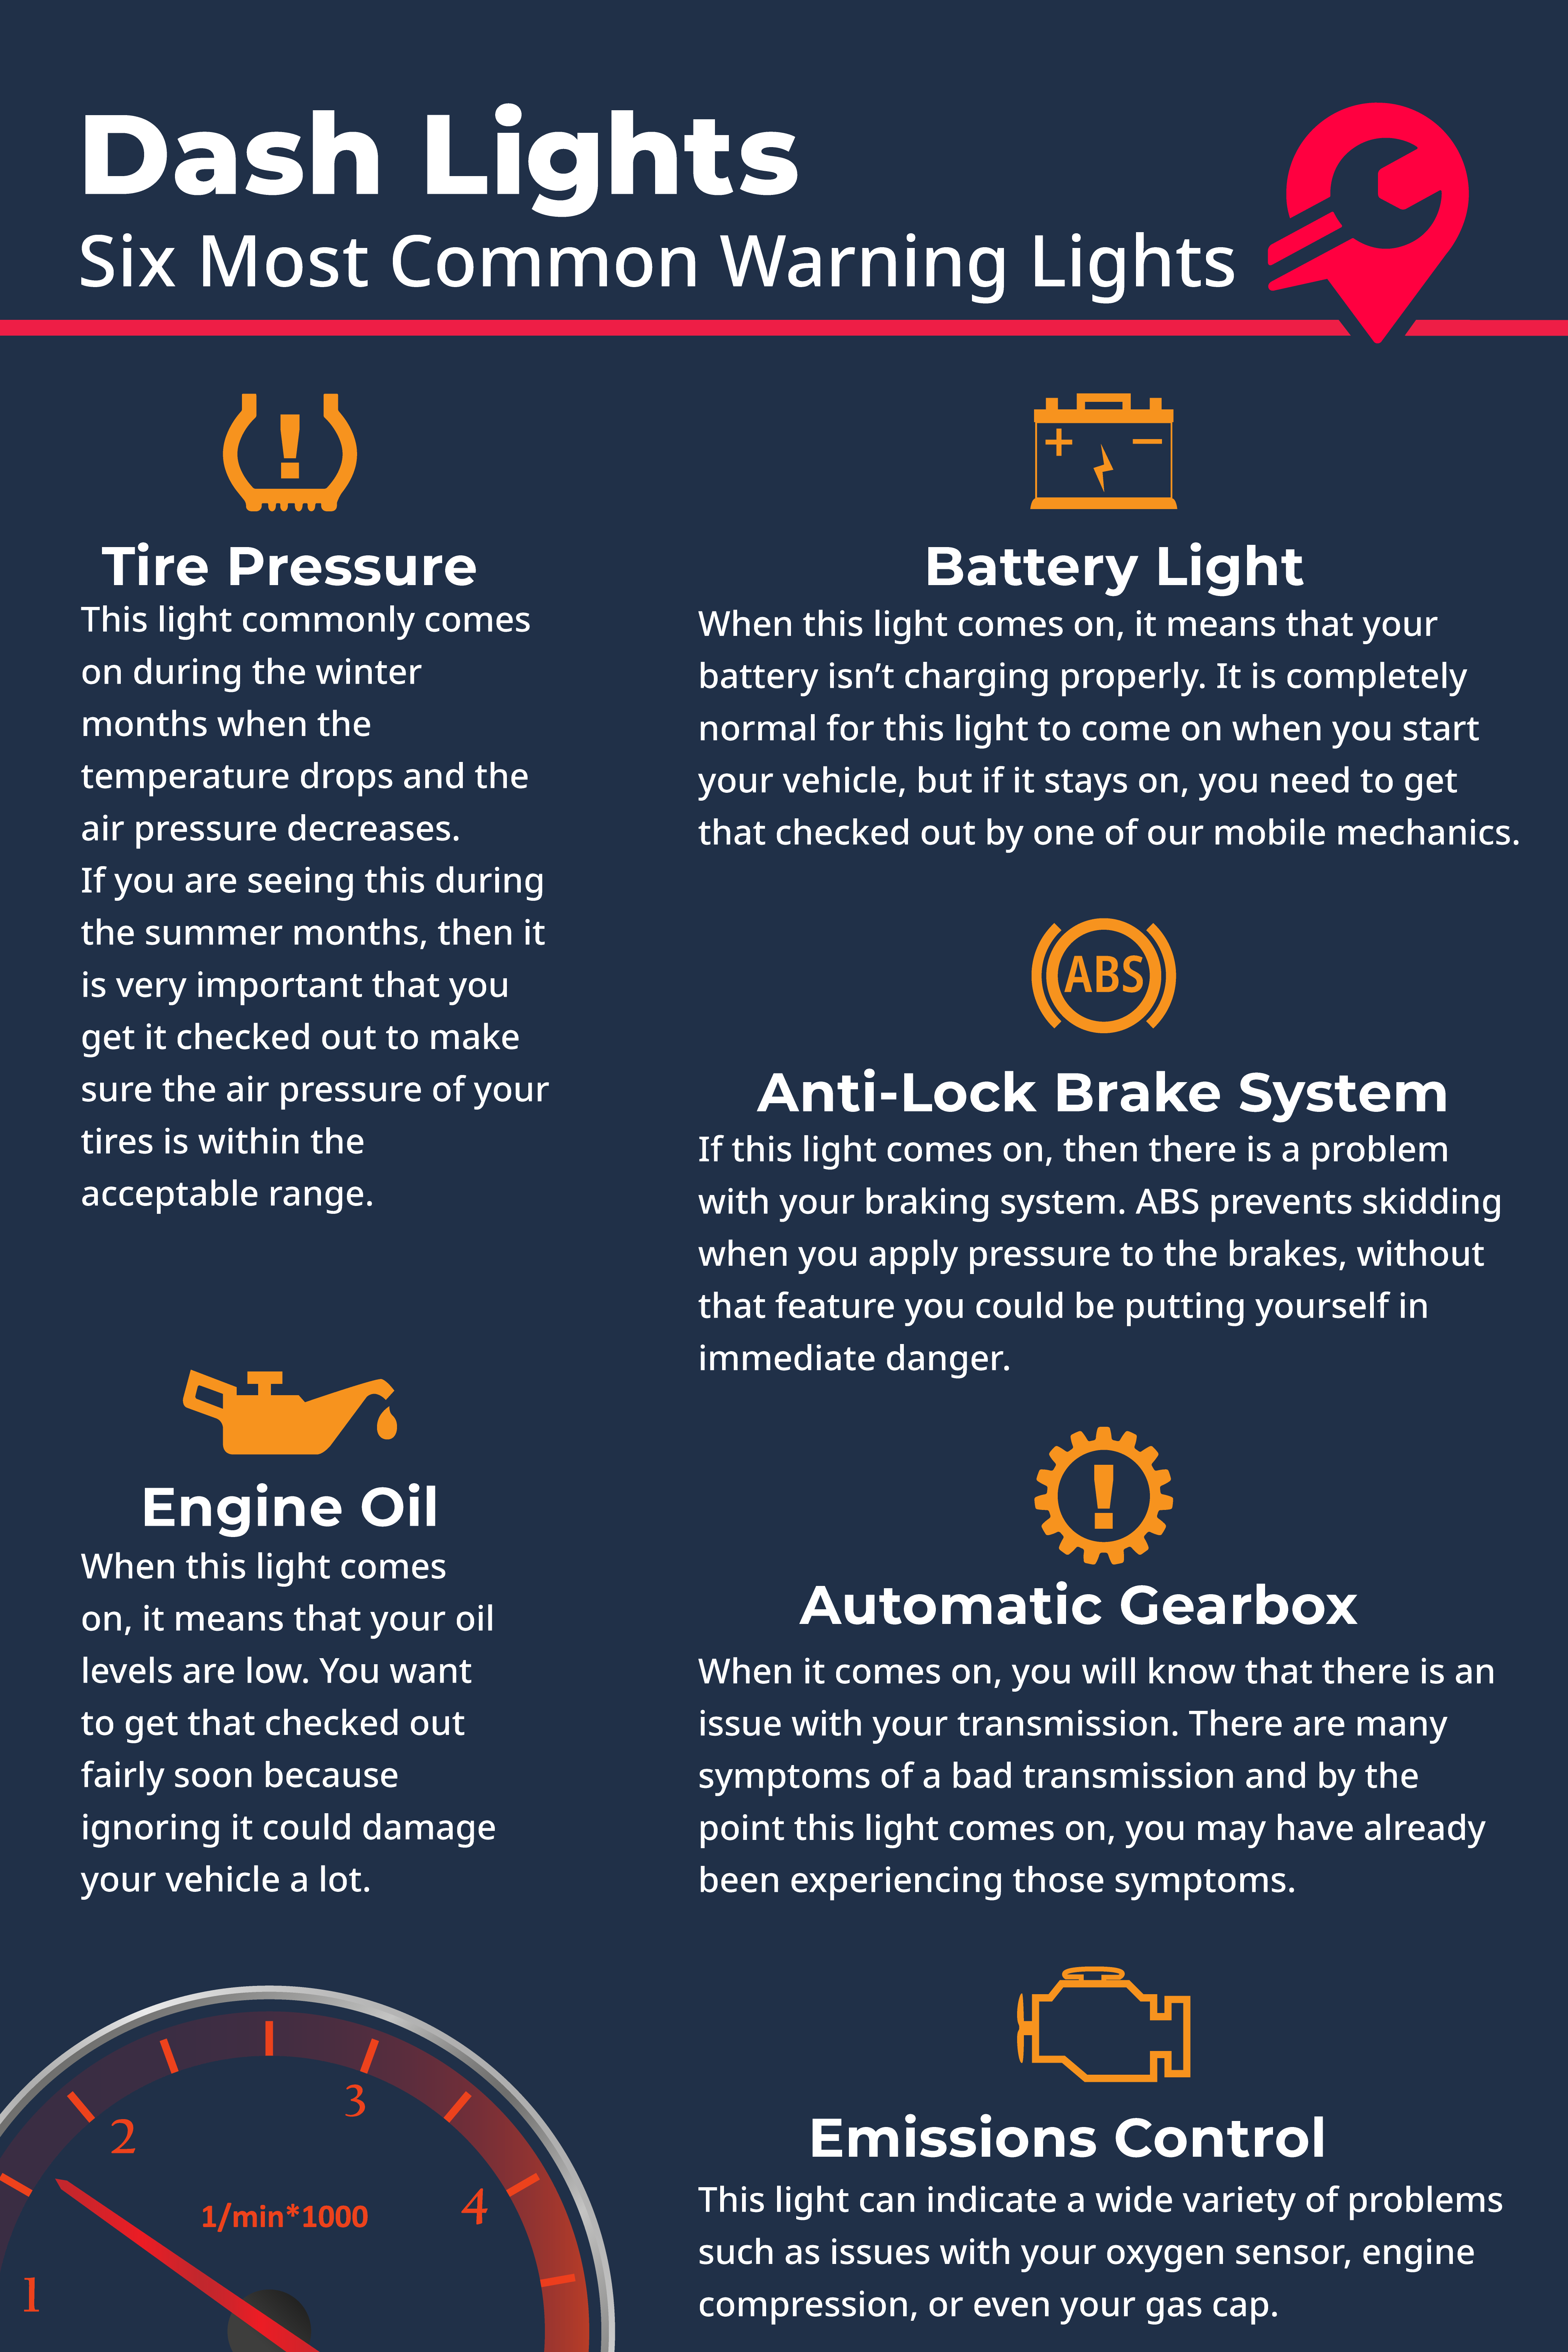 Battery light, Anti-Lock Brake System, Automatic Gearbox, Emissions control, Tire Pressure, Engine Oil are the most common dash light warnings